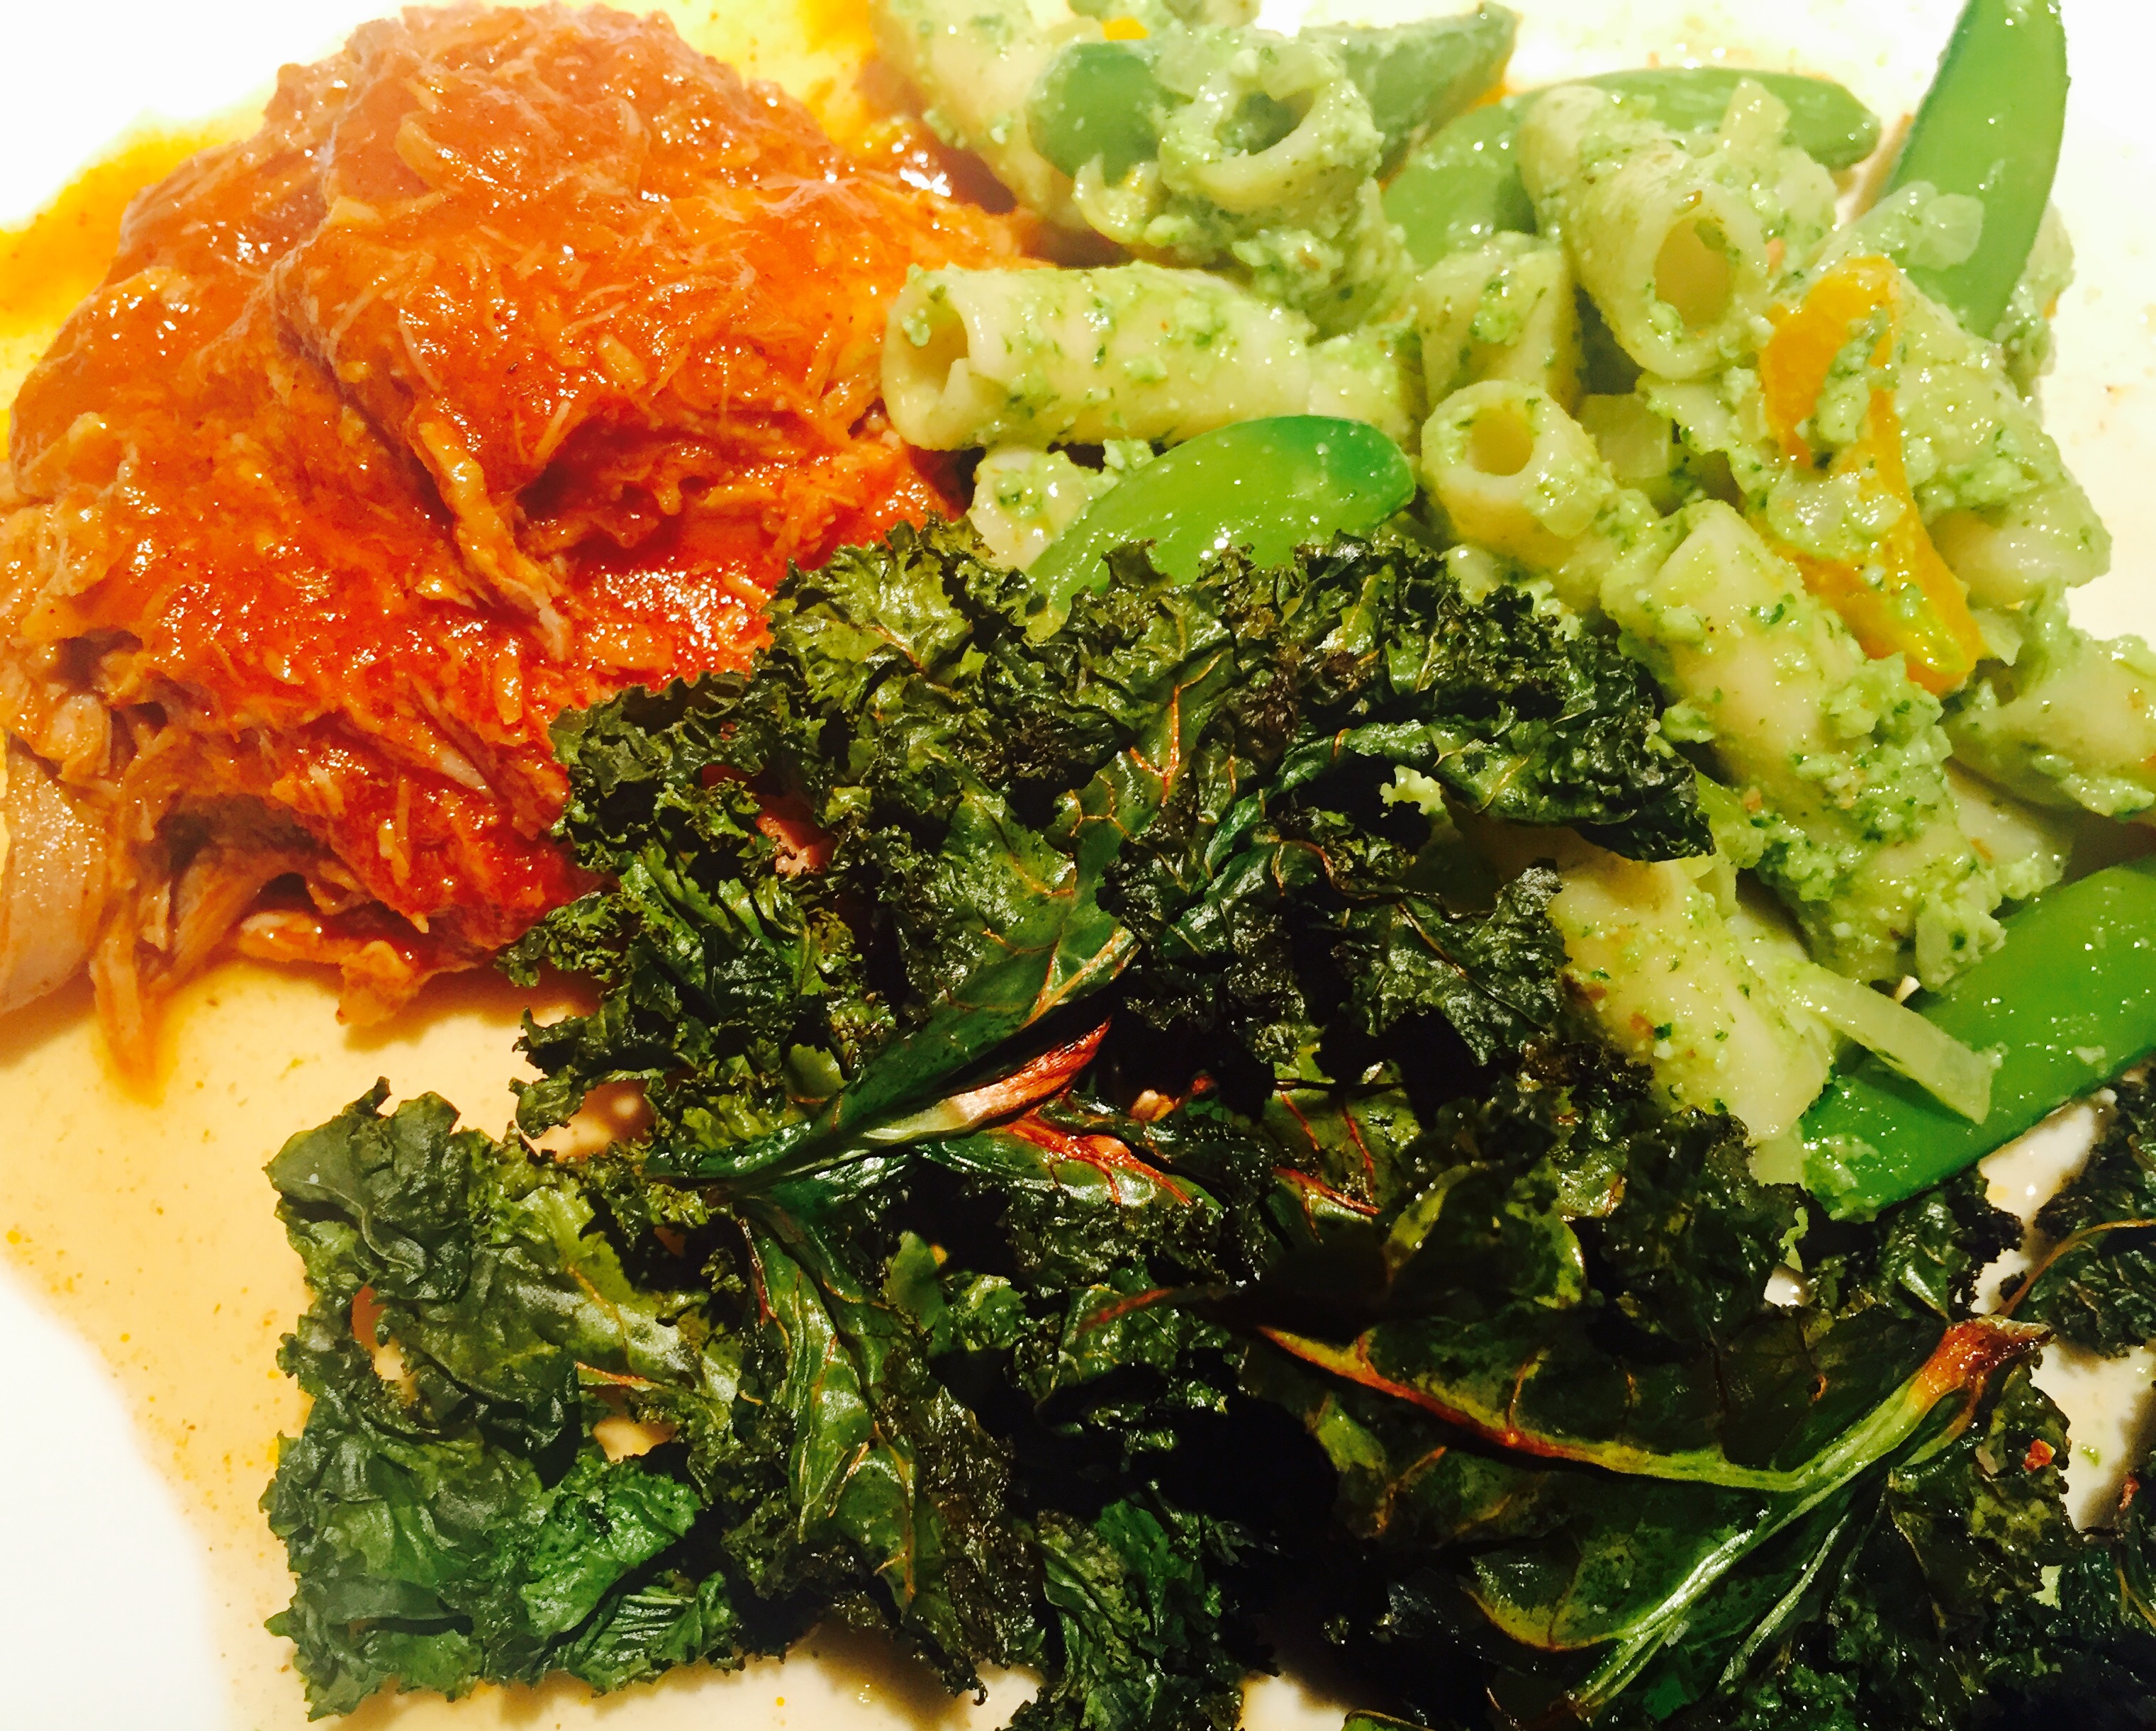 Pulled Pork with Pesto Penne Salad and Kale Chips